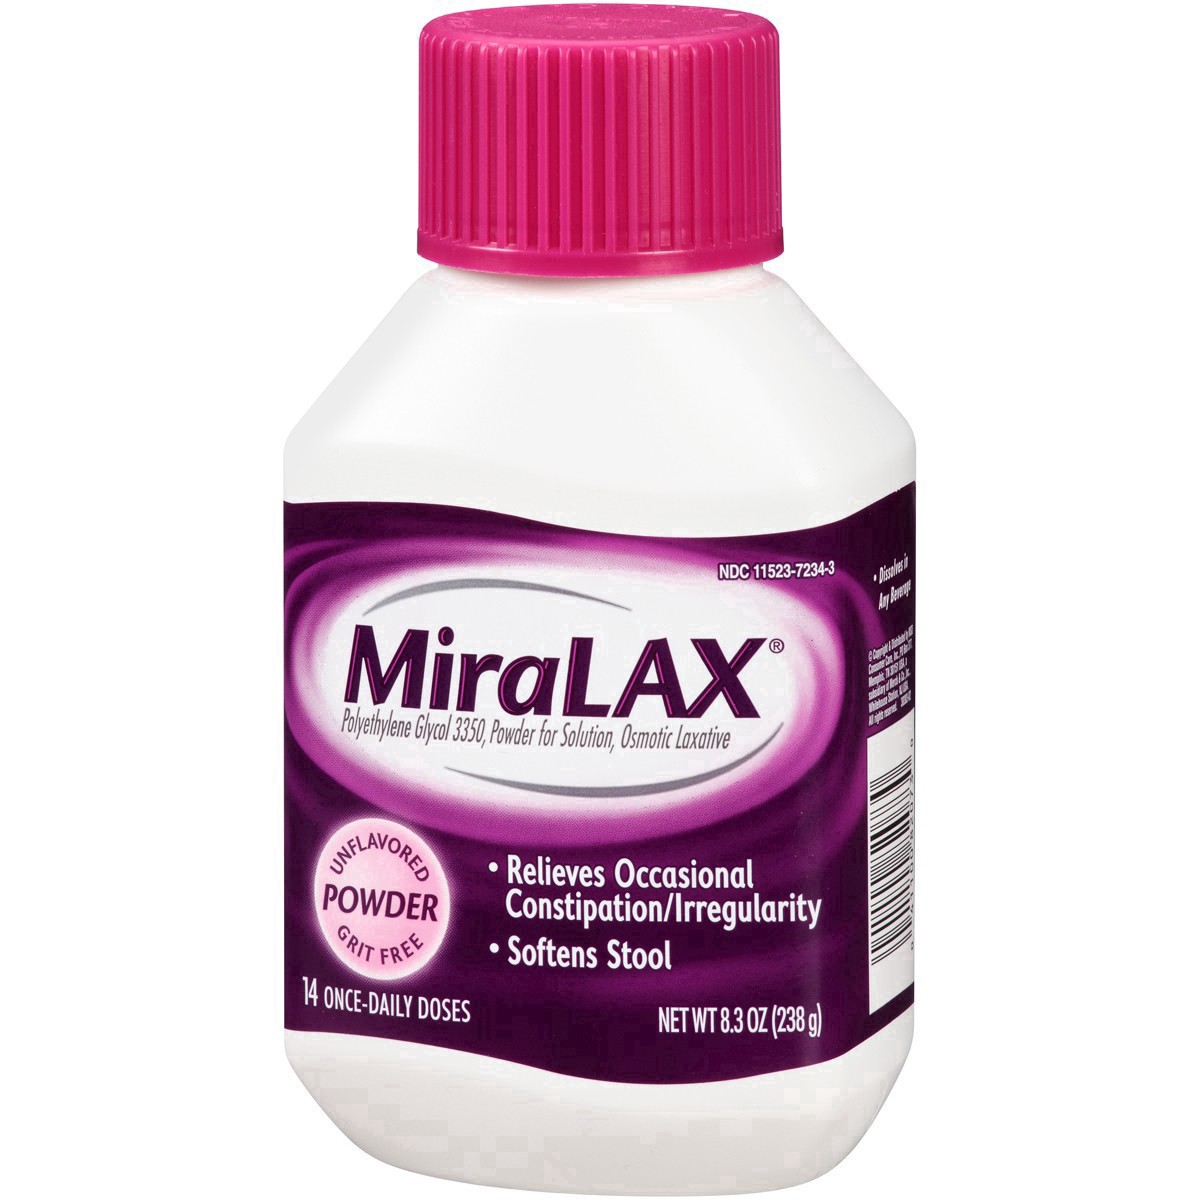 slide 25 of 37, Miralax Powder Osmotic Unflavored Laxative 8.3 oz Bottle, 